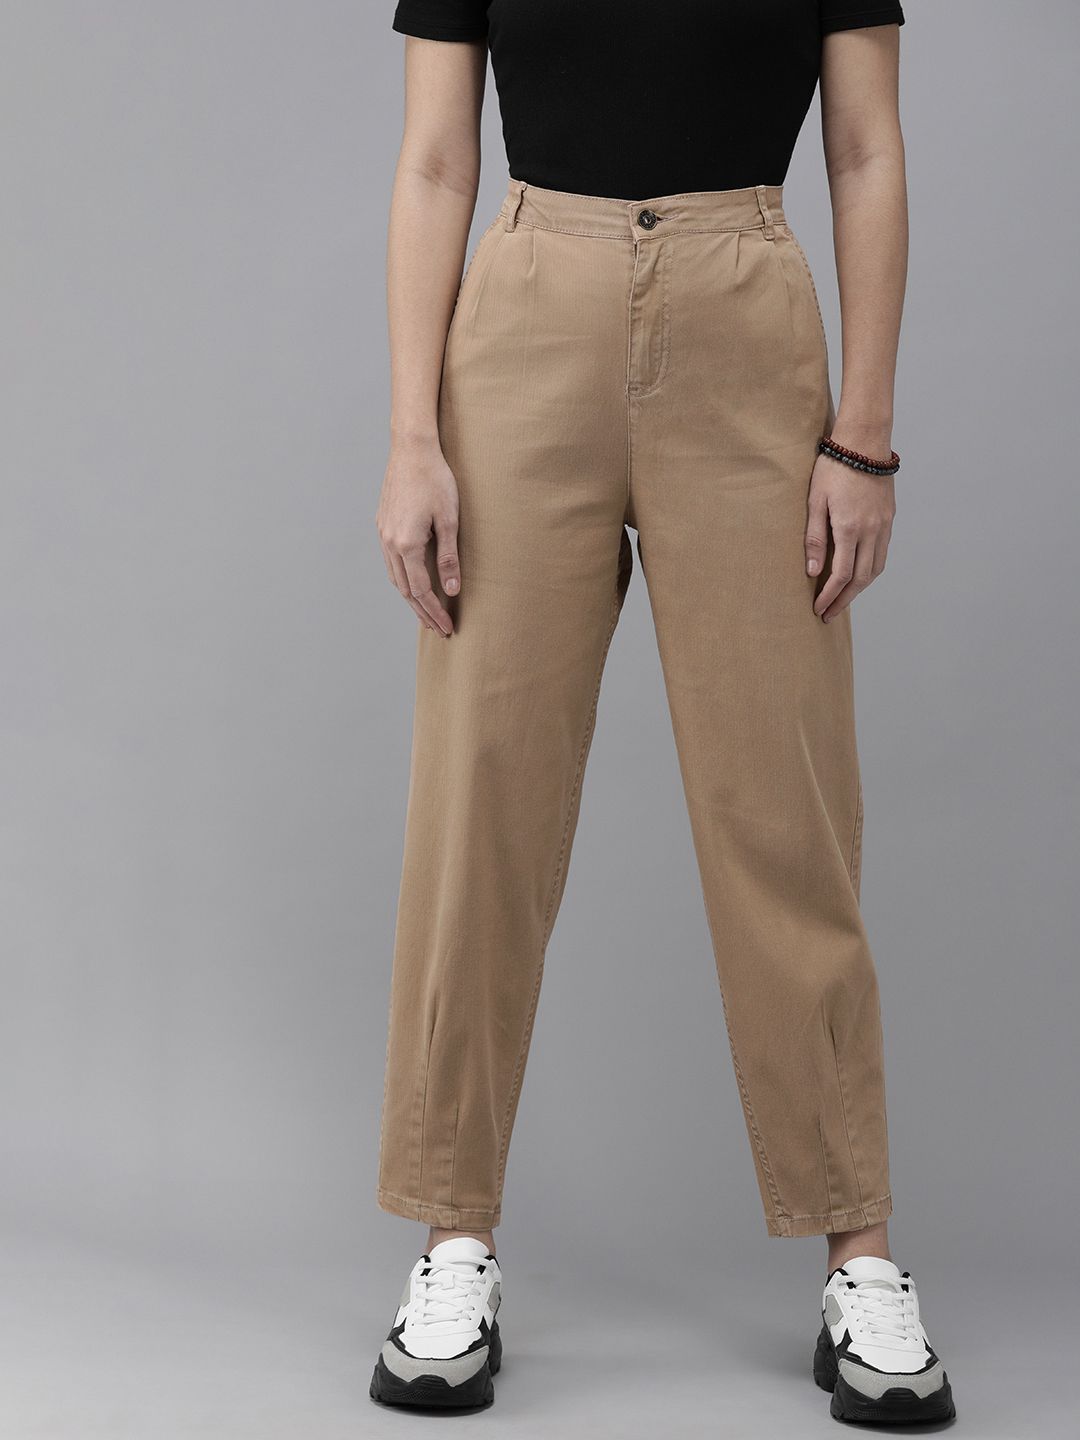 The Roadster Lifestyle Co Women Beige Pleated Chinos Price in India